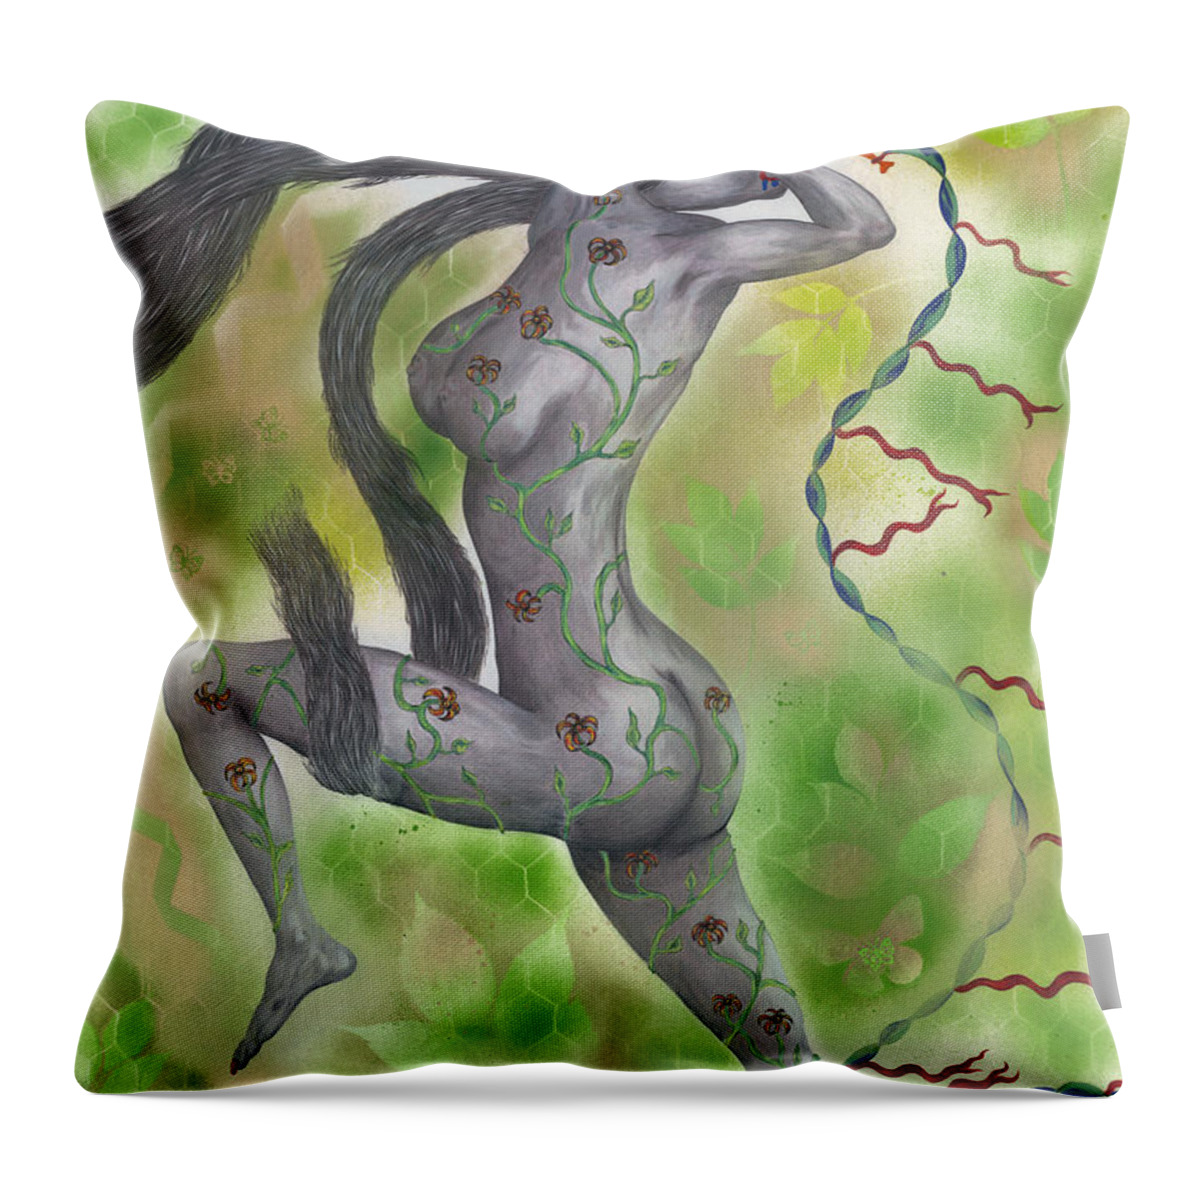 Figurative Drawings Throw Pillow featuring the painting Touched By Nature by Kenneth Clarke